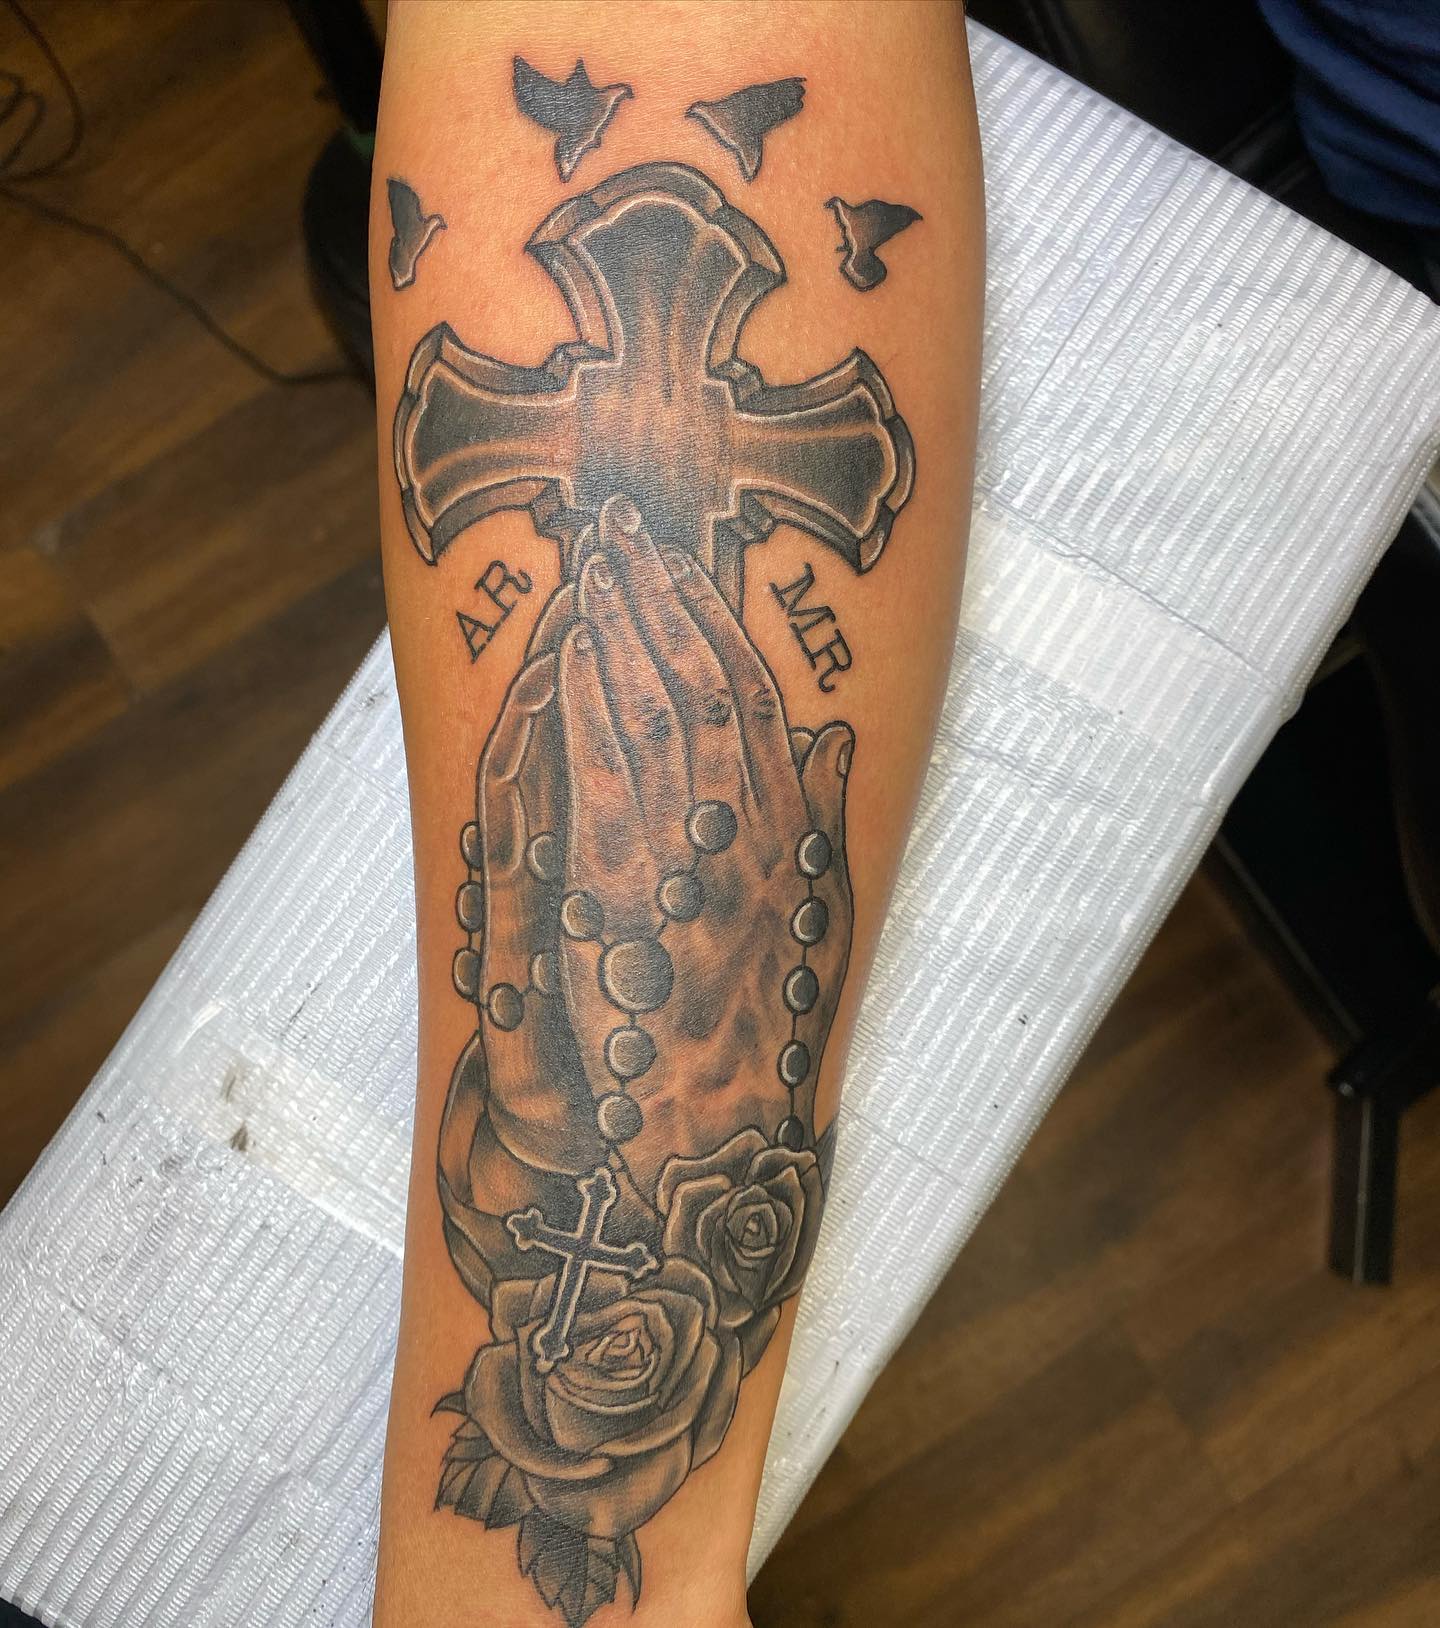 If you're eager to devote a large portion of your skin to a religious tattoo, you'd better check this tattoo out and make your appointment.